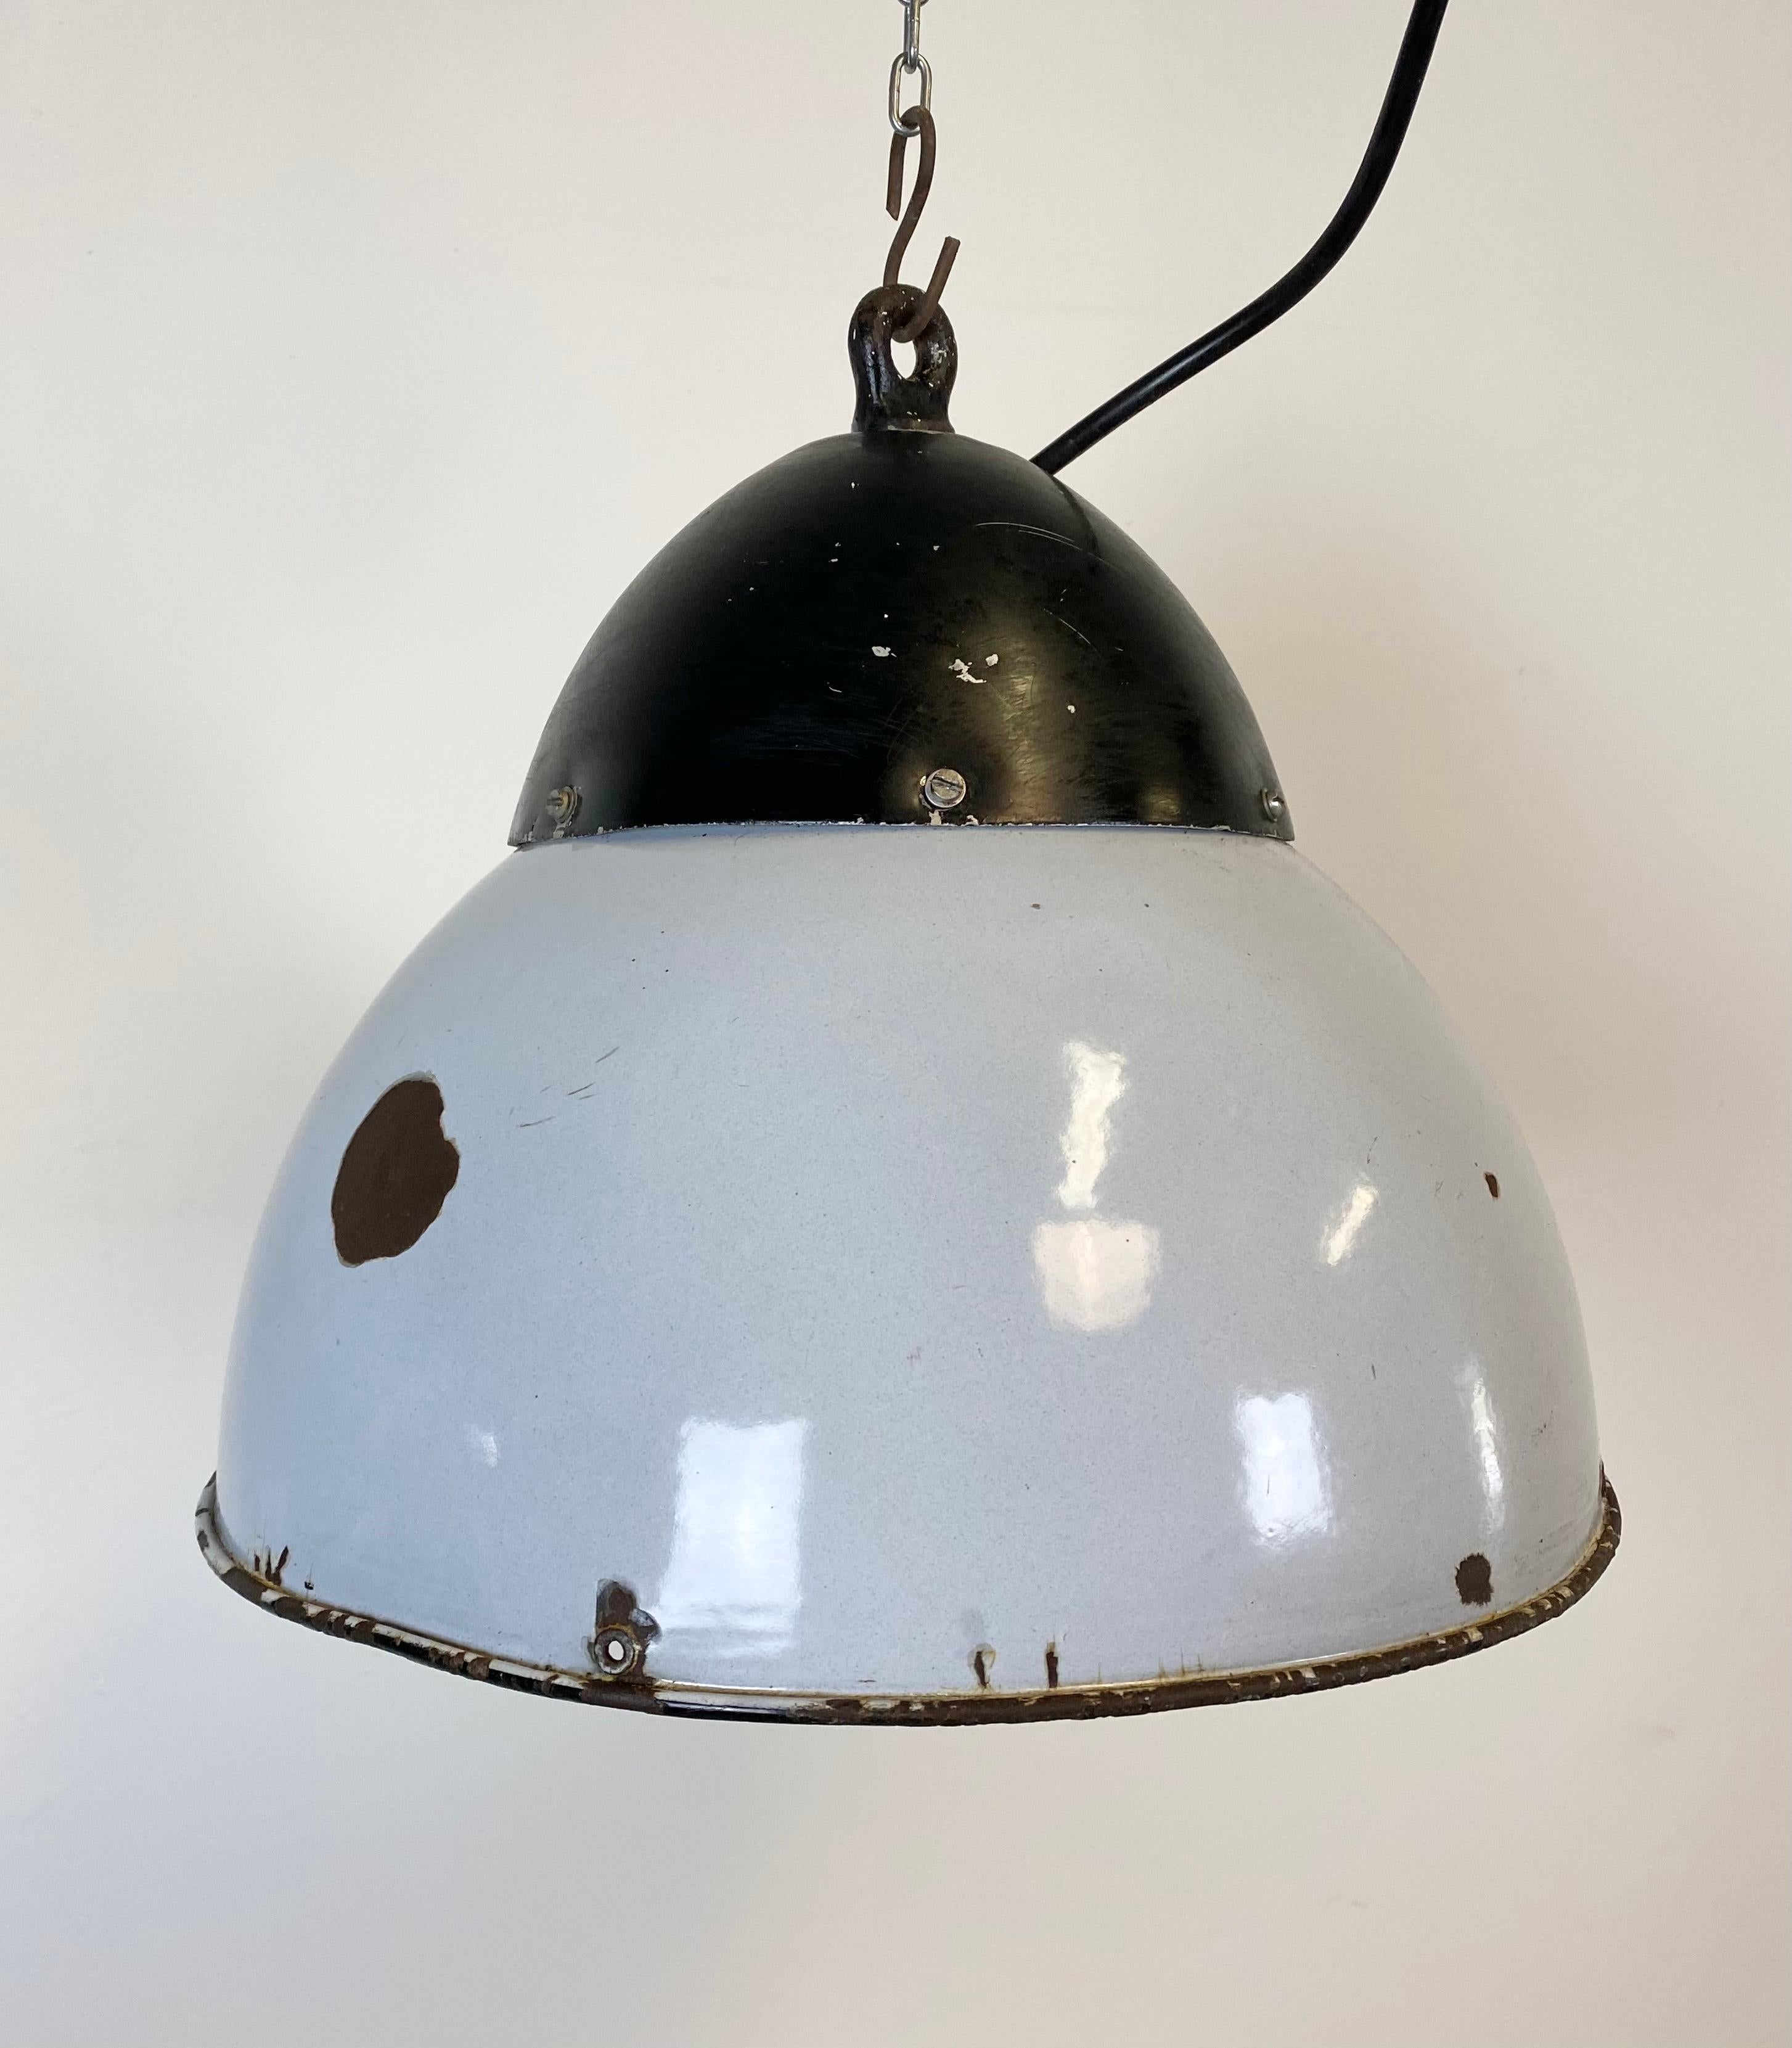 Very old industrial hanging lamp from former Czechoslovakia, 1930s.
Lamp has a black metal dome and a grey enamel lampshade. White interior. Interesting patina.
New socket for E 27 lightbulbs and wire.
Fully functional. The weight of the lamp is